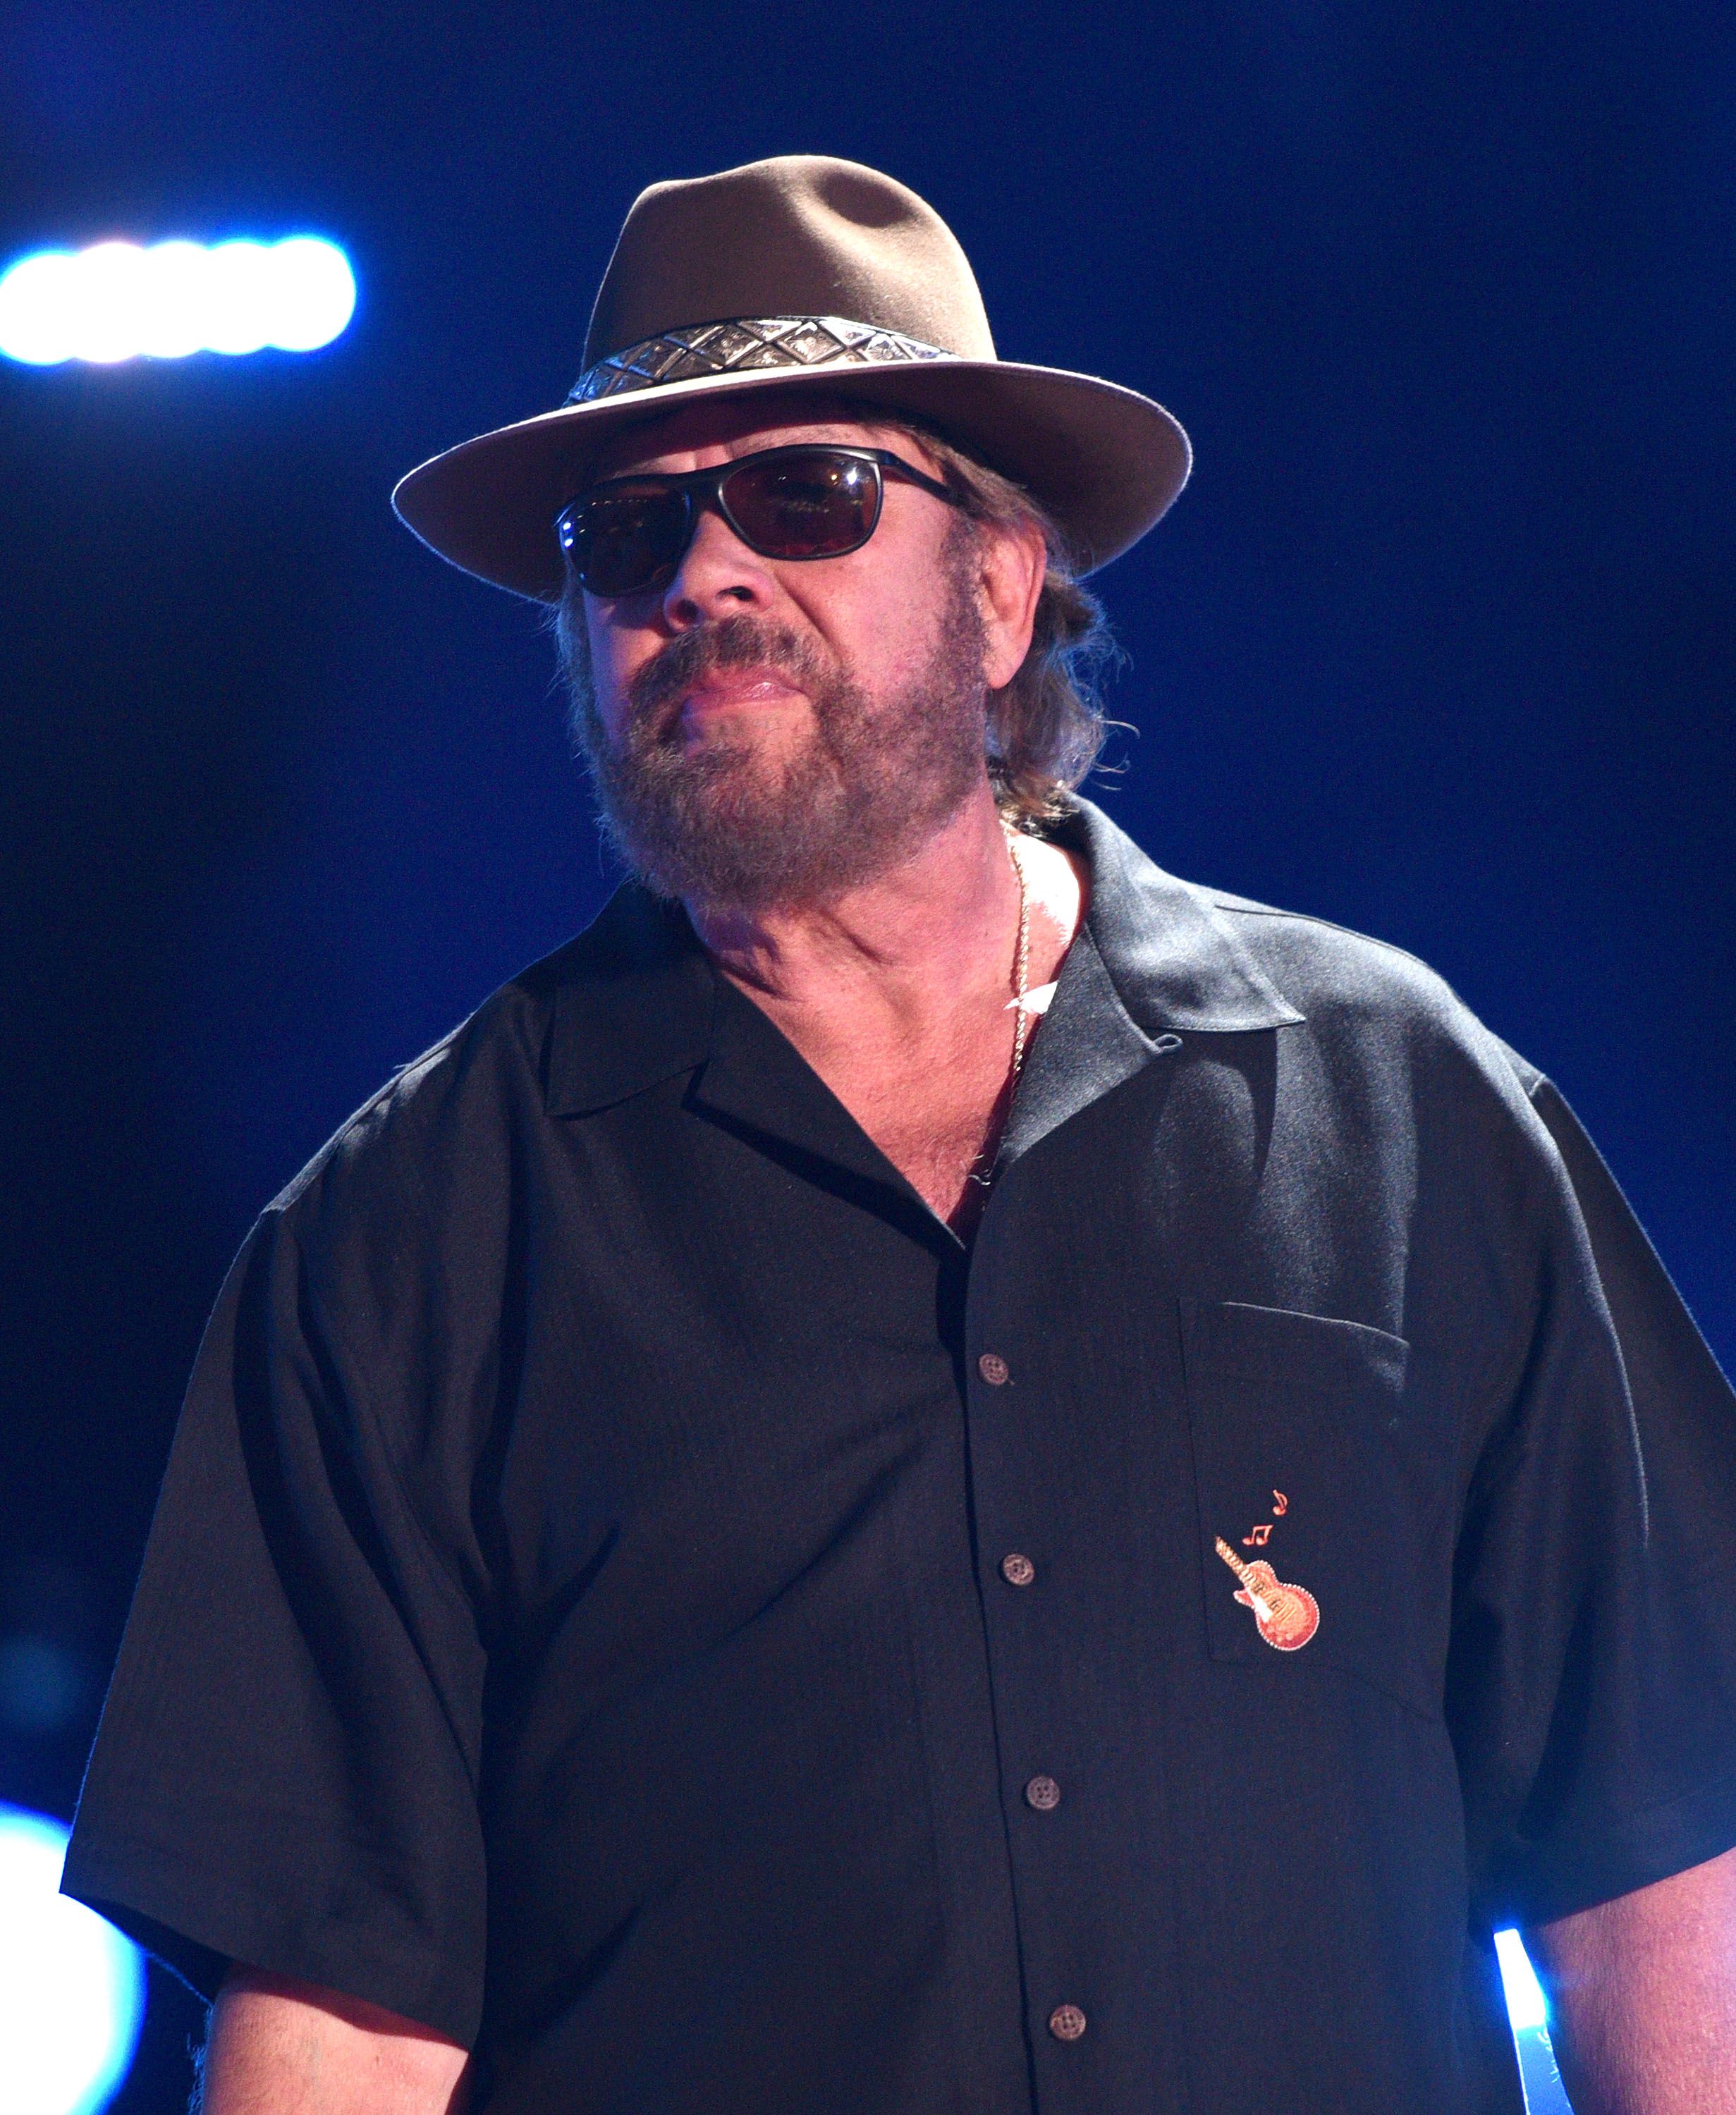 Country singer Hank Williams Jr. on stage during a performance at the 2016 CMA Music Festival on June 10, 2016 in Nashville, Tennessee | Photo: C Flanigan/FilmMagic